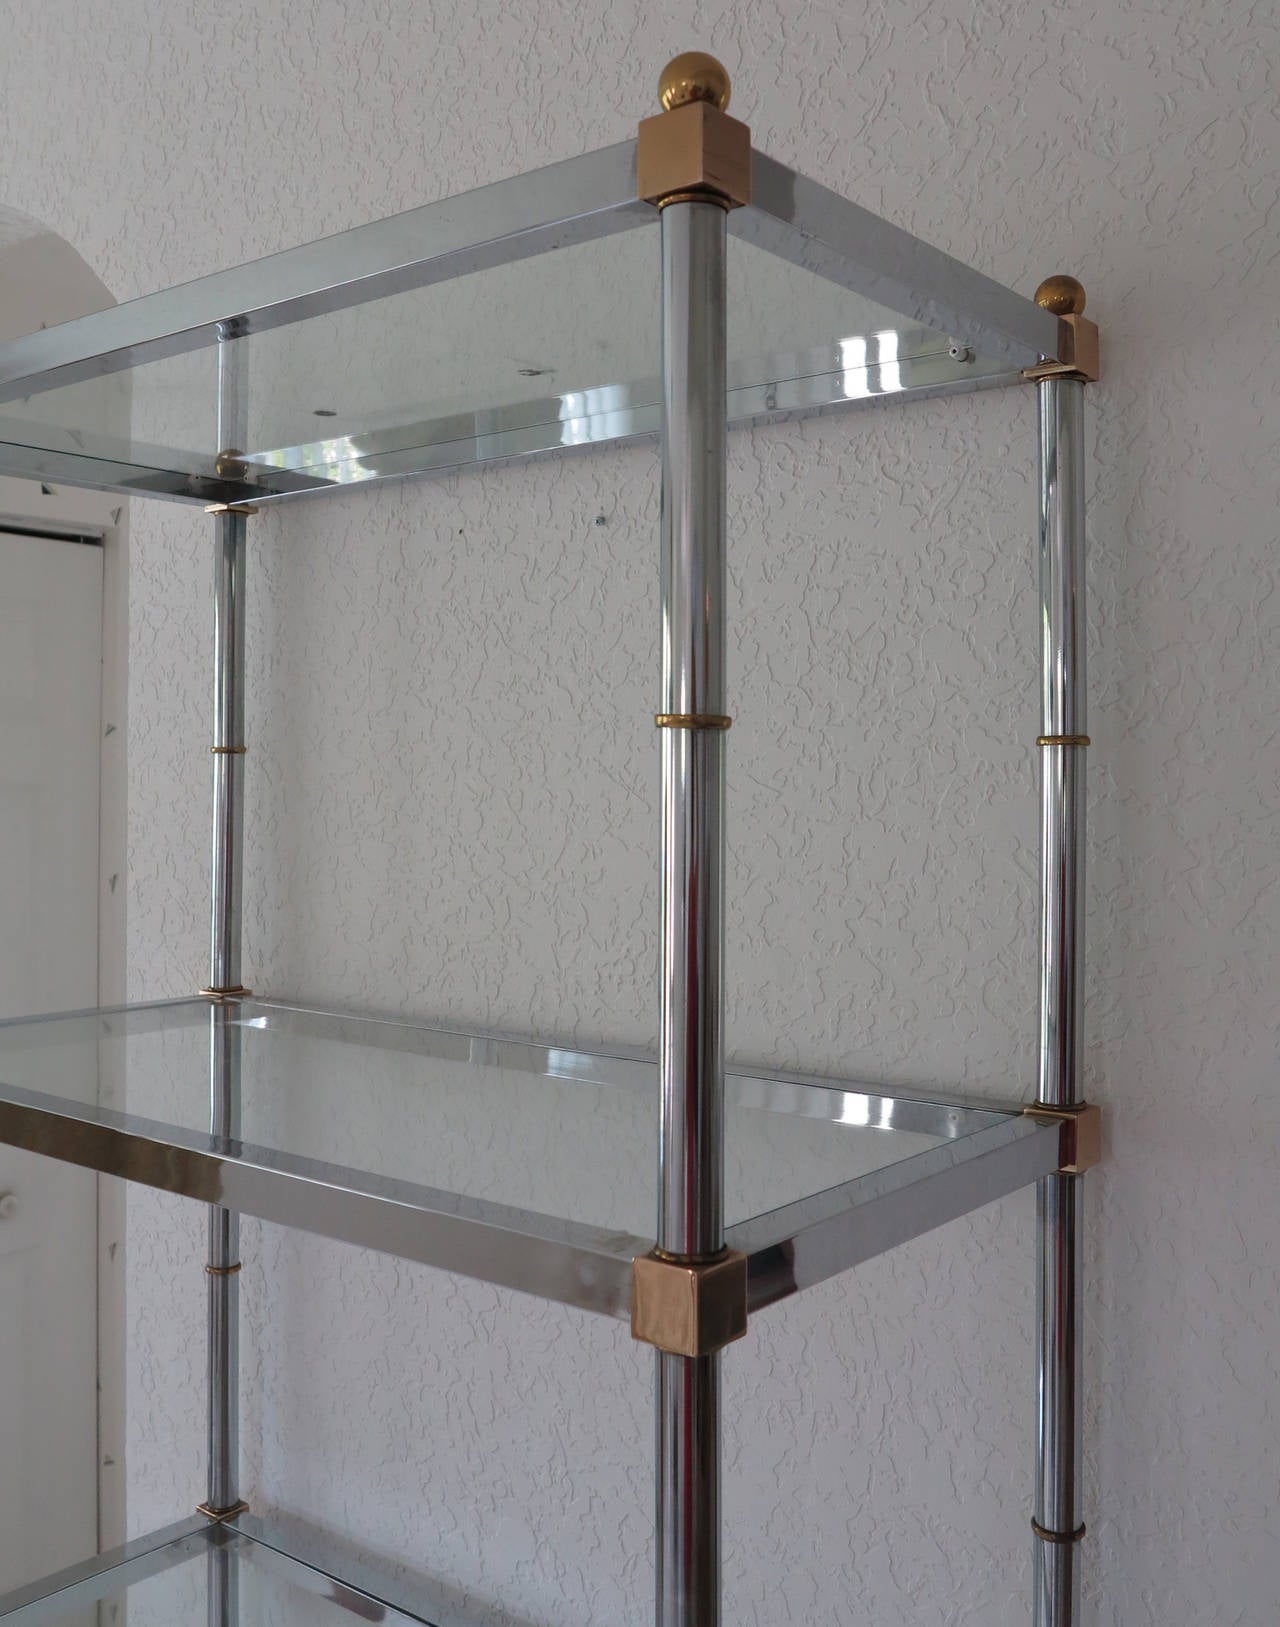 American Chrome and Brass Etagere Glass Shelves